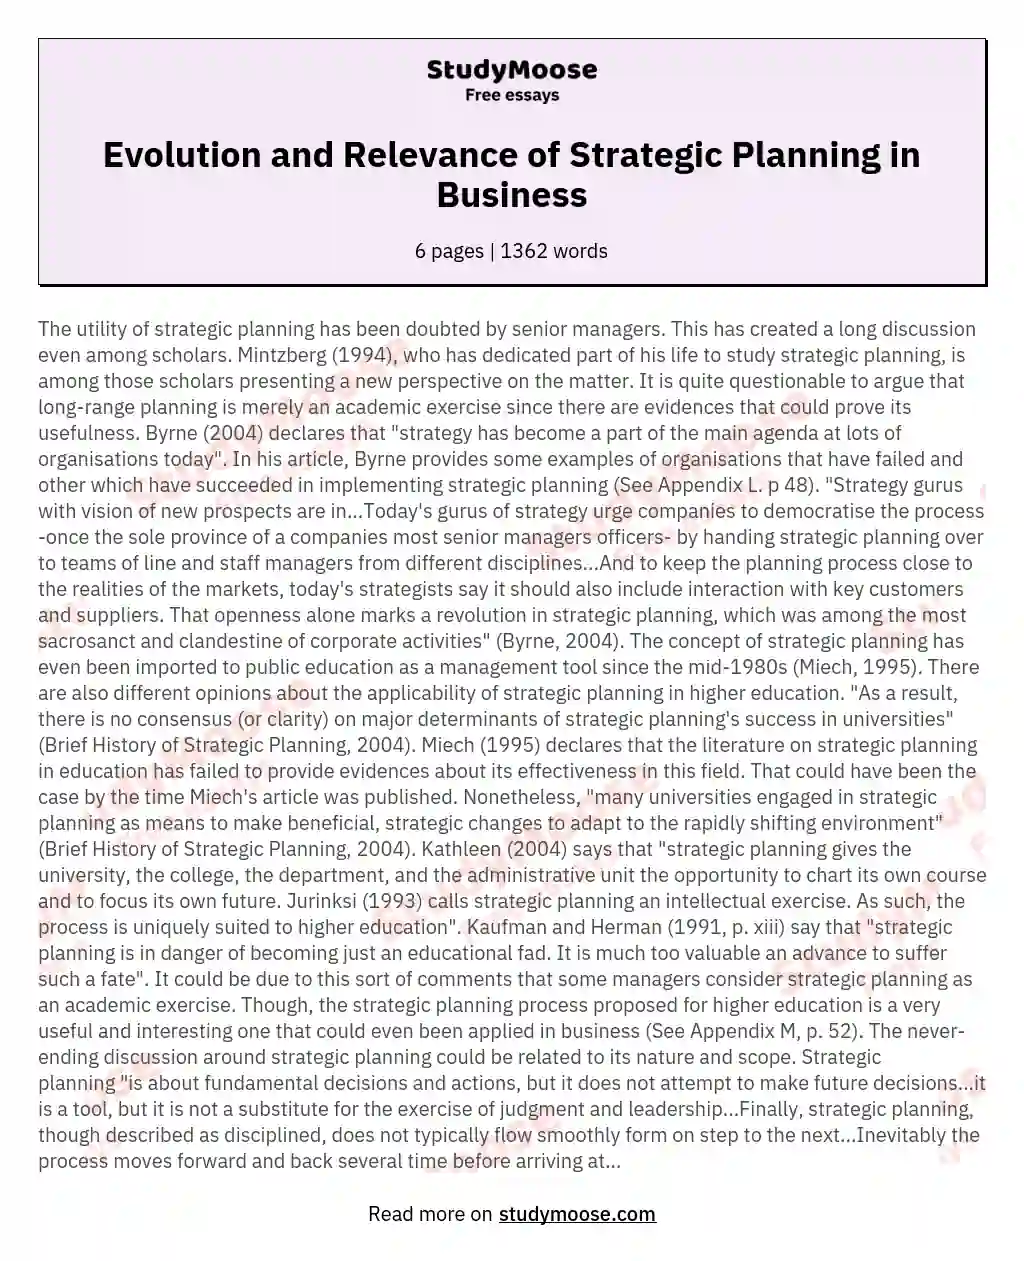 Evolution and Relevance of Strategic Planning in Business essay